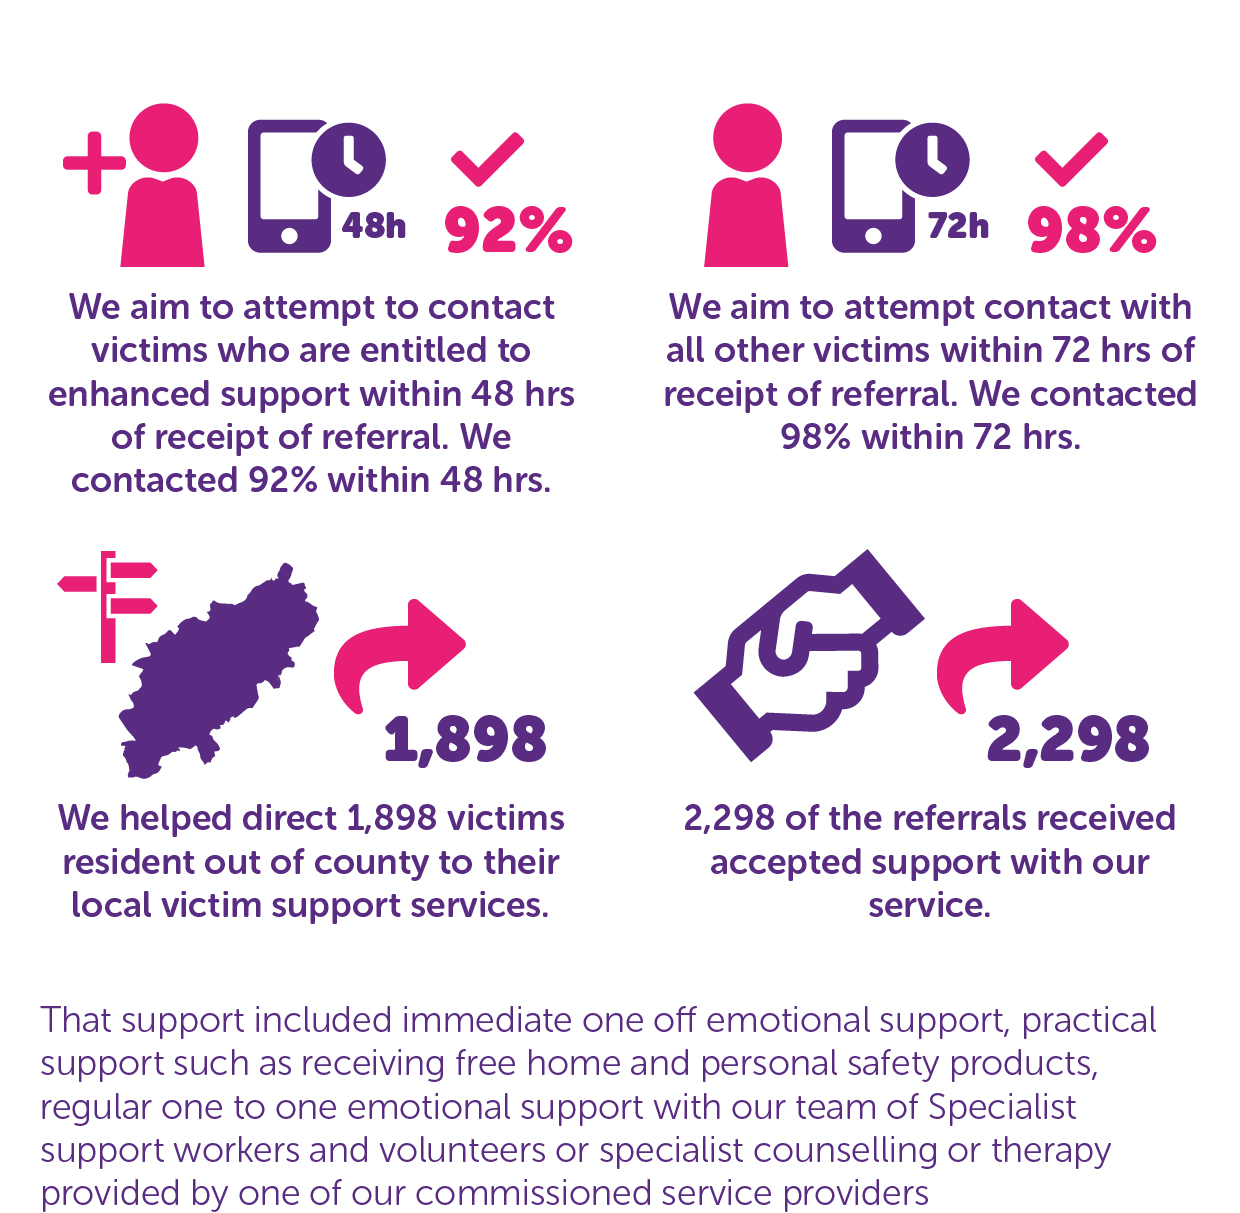 We aim to attempt to contact victims who are entitled to enhanced support within 48 hrs of receipt of referral. We contacted 92% within 48 hrs. We aim to attempt contact with all other victims within 72 hrs of receipt of referral. We contacted 98% within 72 hrs. We helped direct 1,898 victims resident out of county to their local victim support services. 2,298 of the referrals received accepted support with our service. That support included immediate one off emotional support, practical support such as receiving free home and personal safety products, regular one to one emotional support with our team of Specialist support workers and volunteers or specialist counselling or therapy provided by one of our commissioned service providers.